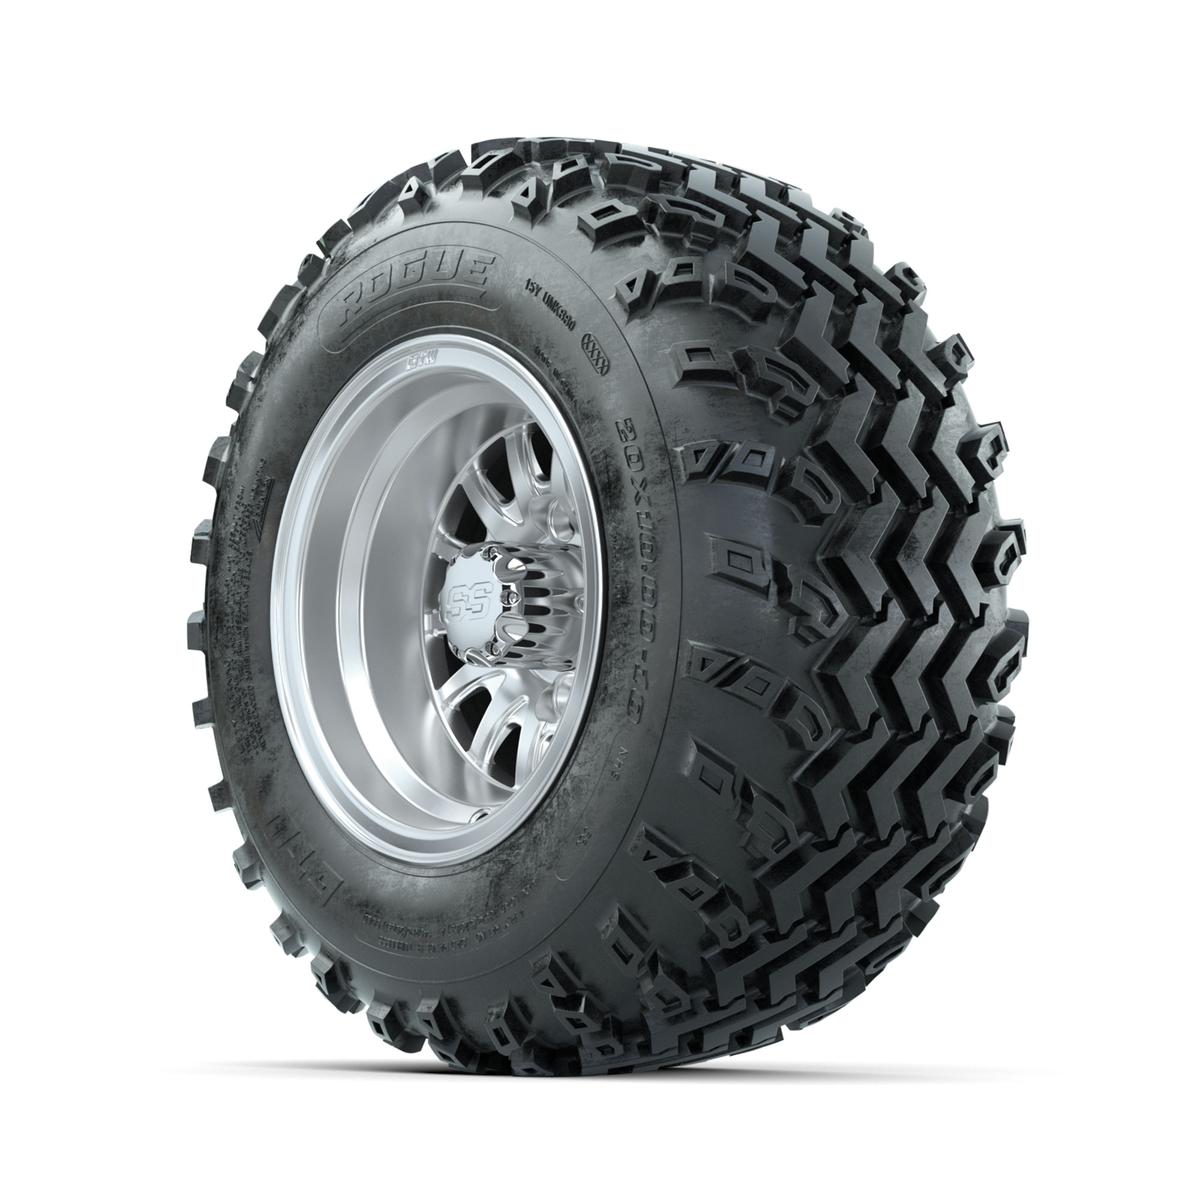 GTW Medusa Machined/Silver 10 in Wheels with 20x10.00-10 Rogue All Terrain Tires – Full Set